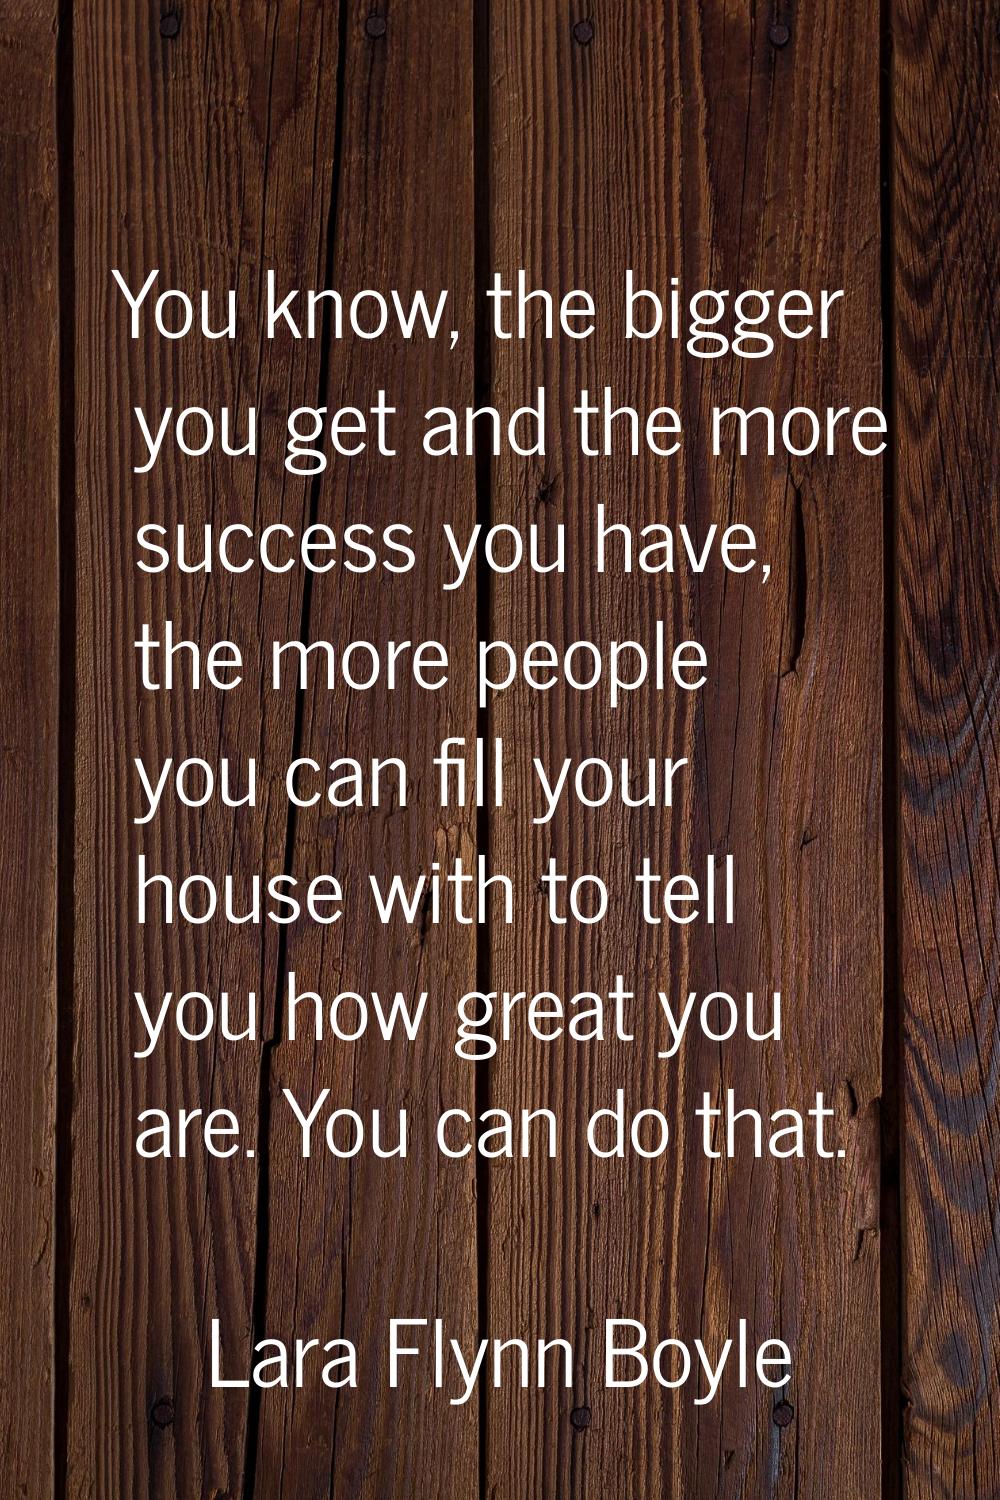 You know, the bigger you get and the more success you have, the more people you can fill your house